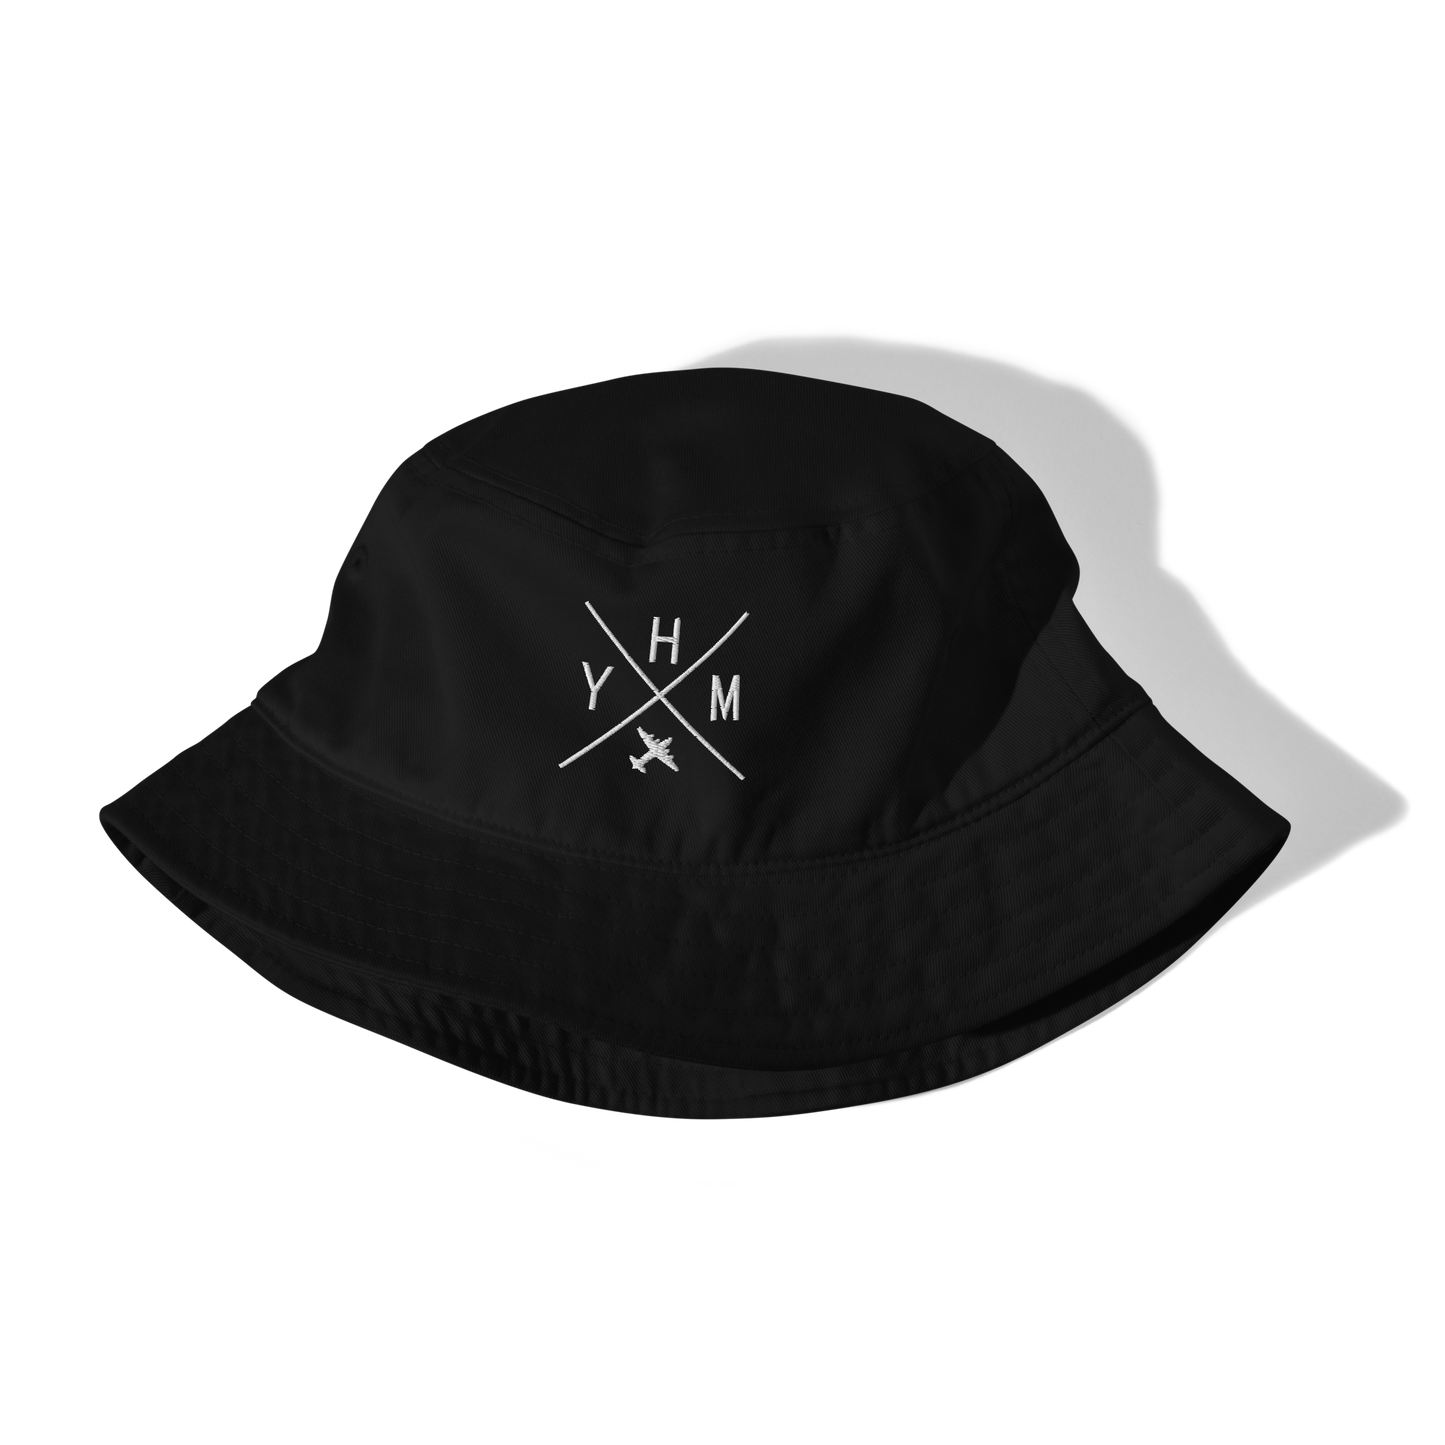 YHM Designs - YHM Hamilton Organic Cotton Bucket Hat - Crossed-X Design with Airport Code and Vintage Propliner - White Embroidery - Image 02